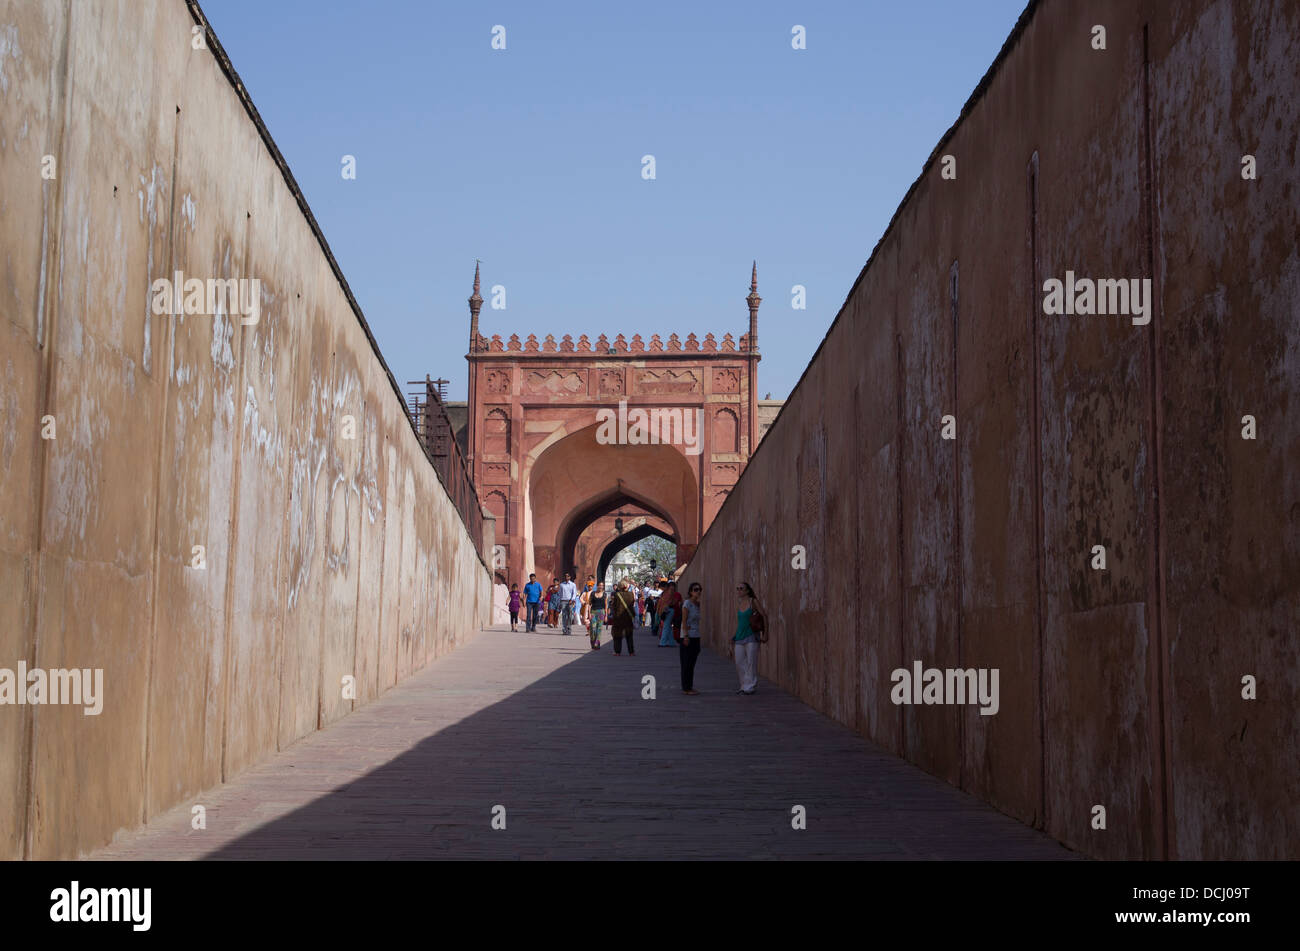 Agra Fort / Red Fort, Agra, India a UNESCO World Heritage site Stock Photo